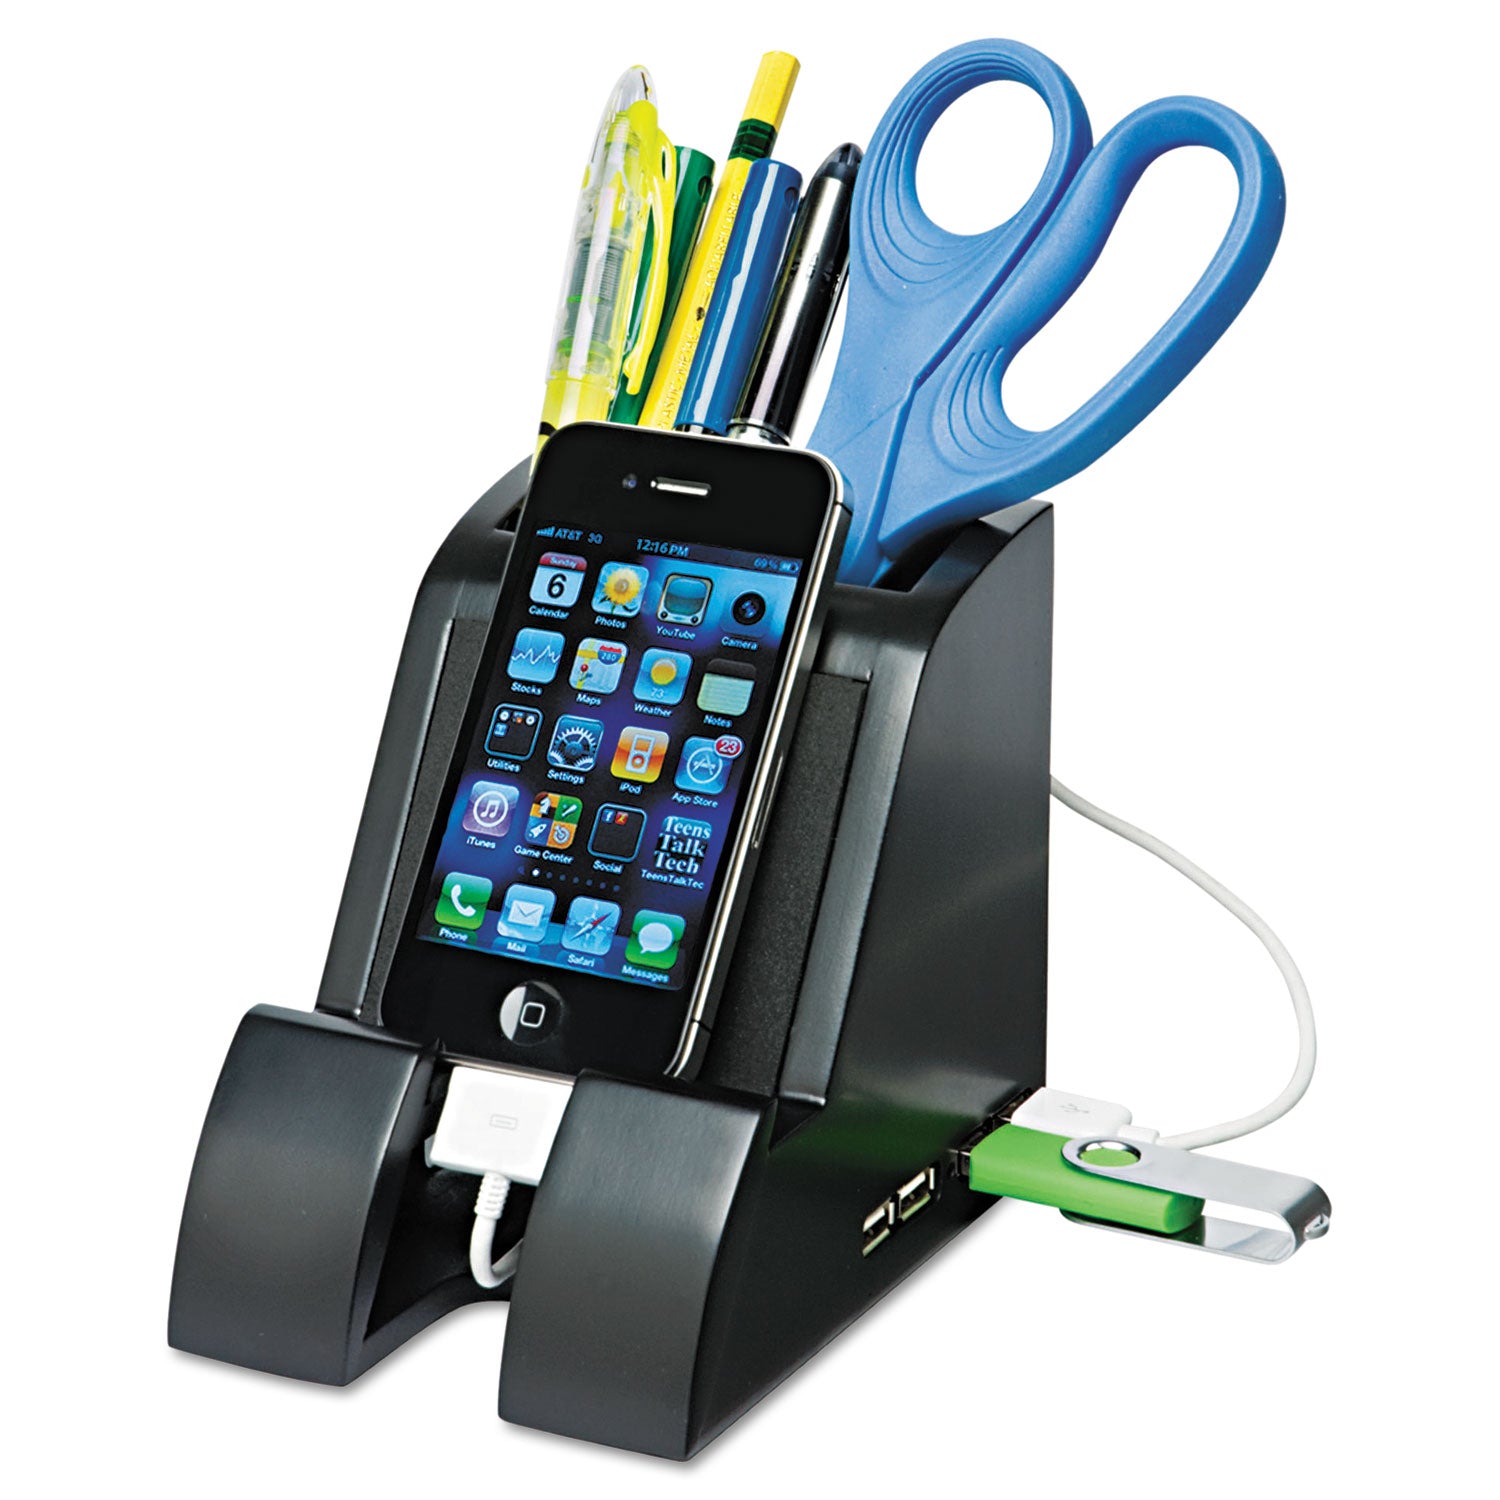 Smart Charge Pencil Cup with USB Charging Hub, Black - 